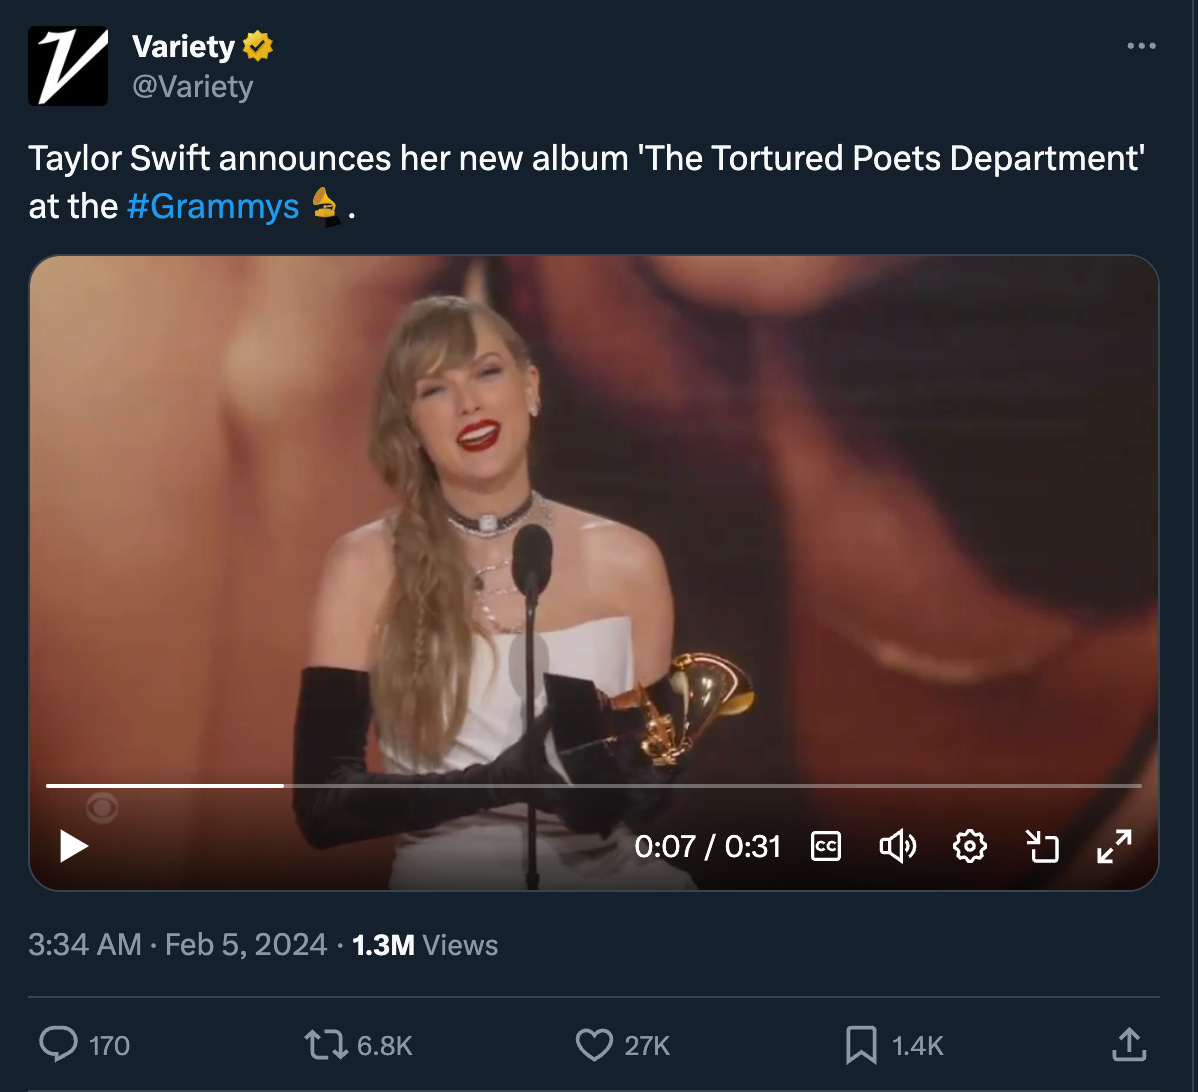 A tweet from Variety. It reads "Taylor Swift announces her new album 'The Tortured Poets Department' at the #Grammys." THere's a video but it's frozen on a frame of Taylor Swift at the mic with a Grammy award wearing a white dress and black gloves.